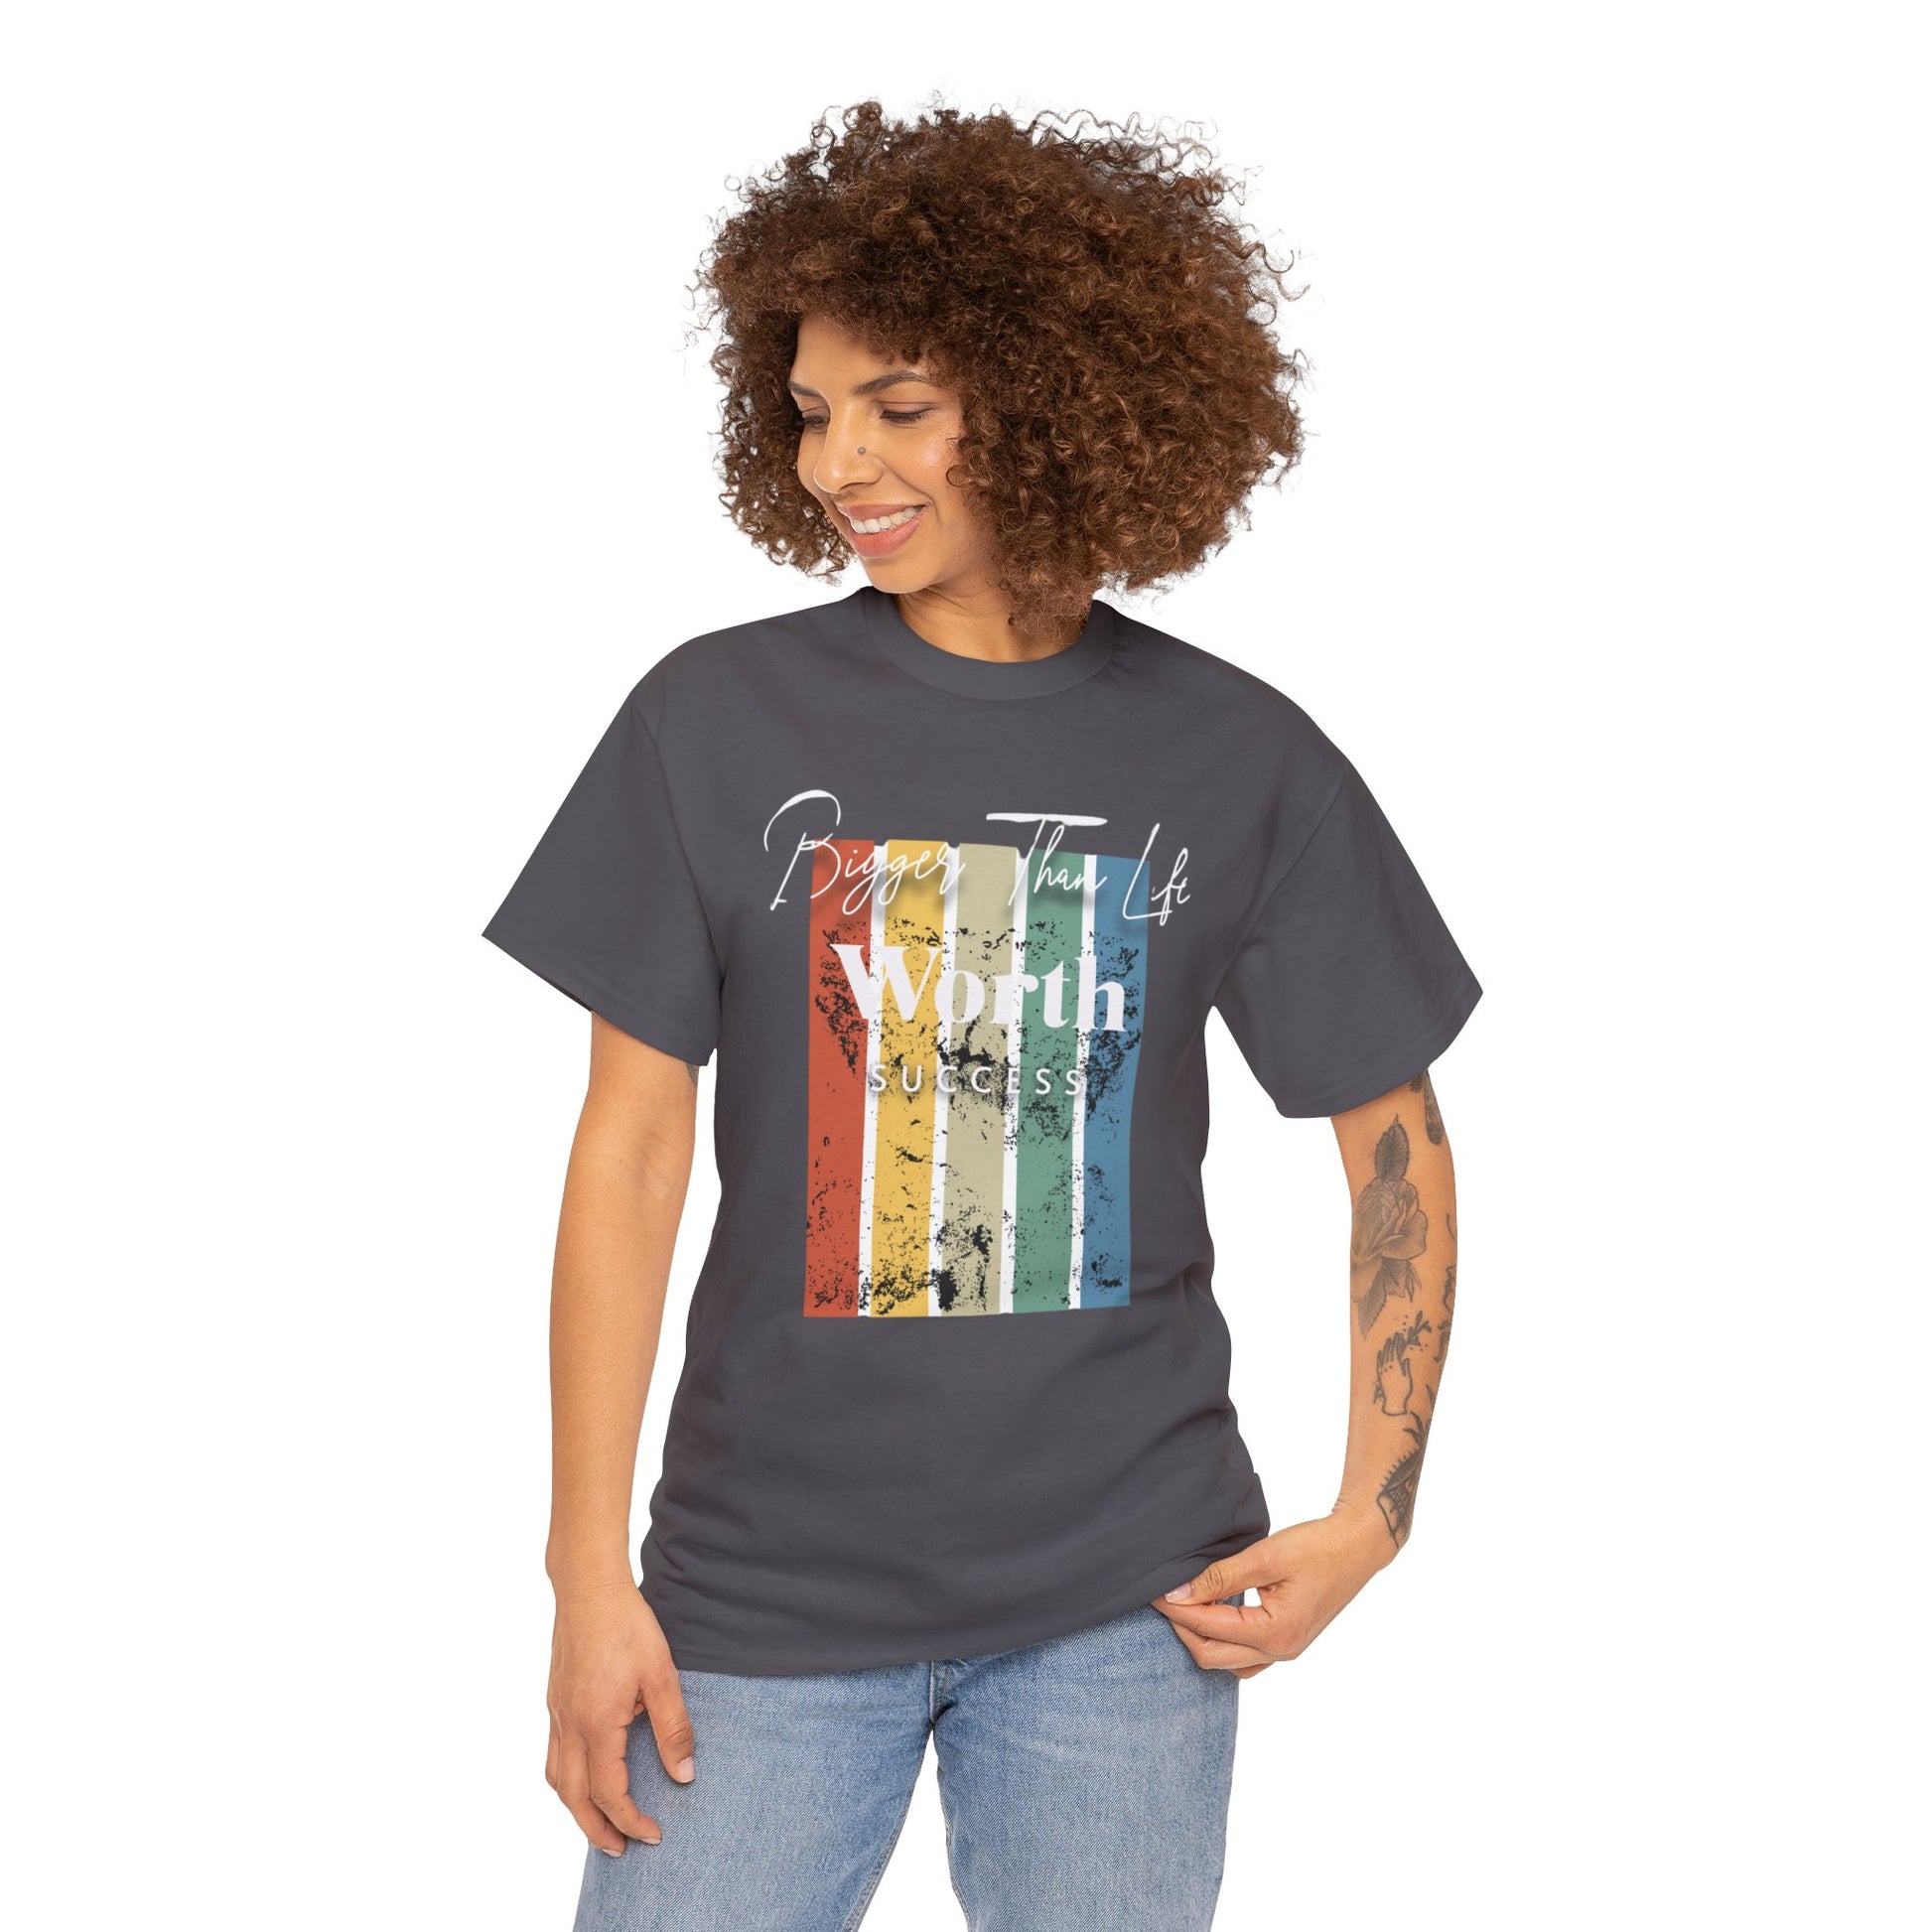 Stylish aspiration-themed tee, perfect for a modern, purpose-driven look.